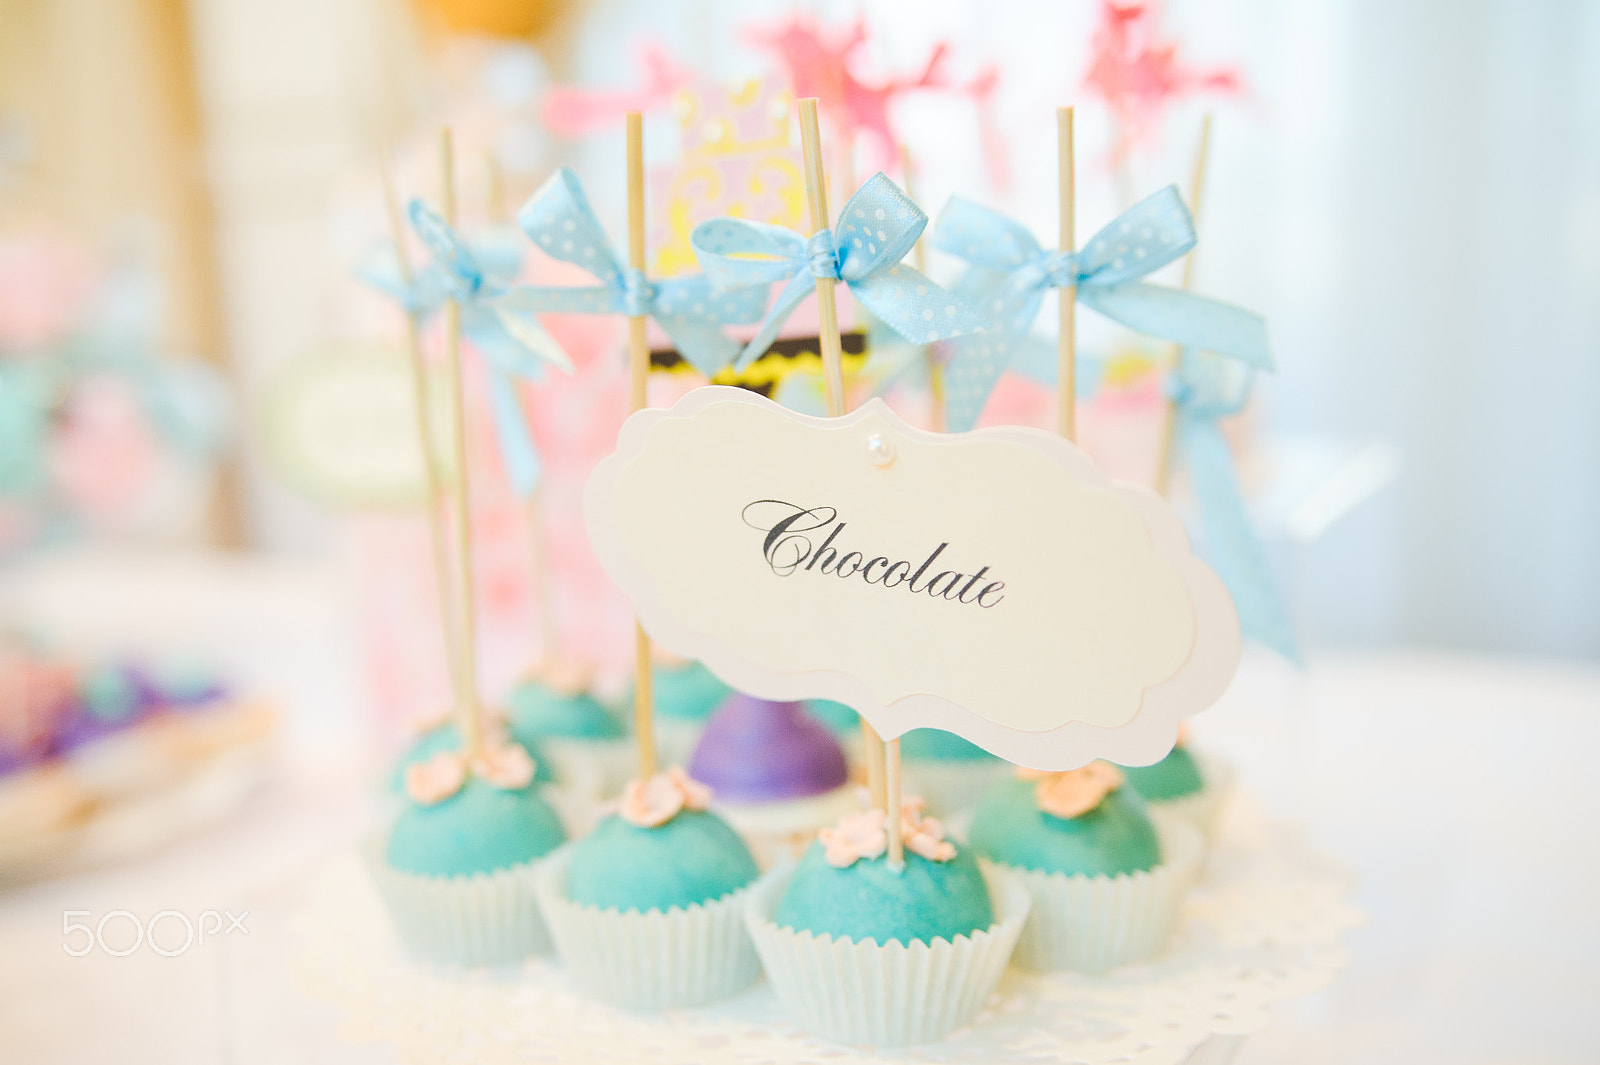 Nikon D700 sample photo. Wedding dessert with delicious cake pops photography